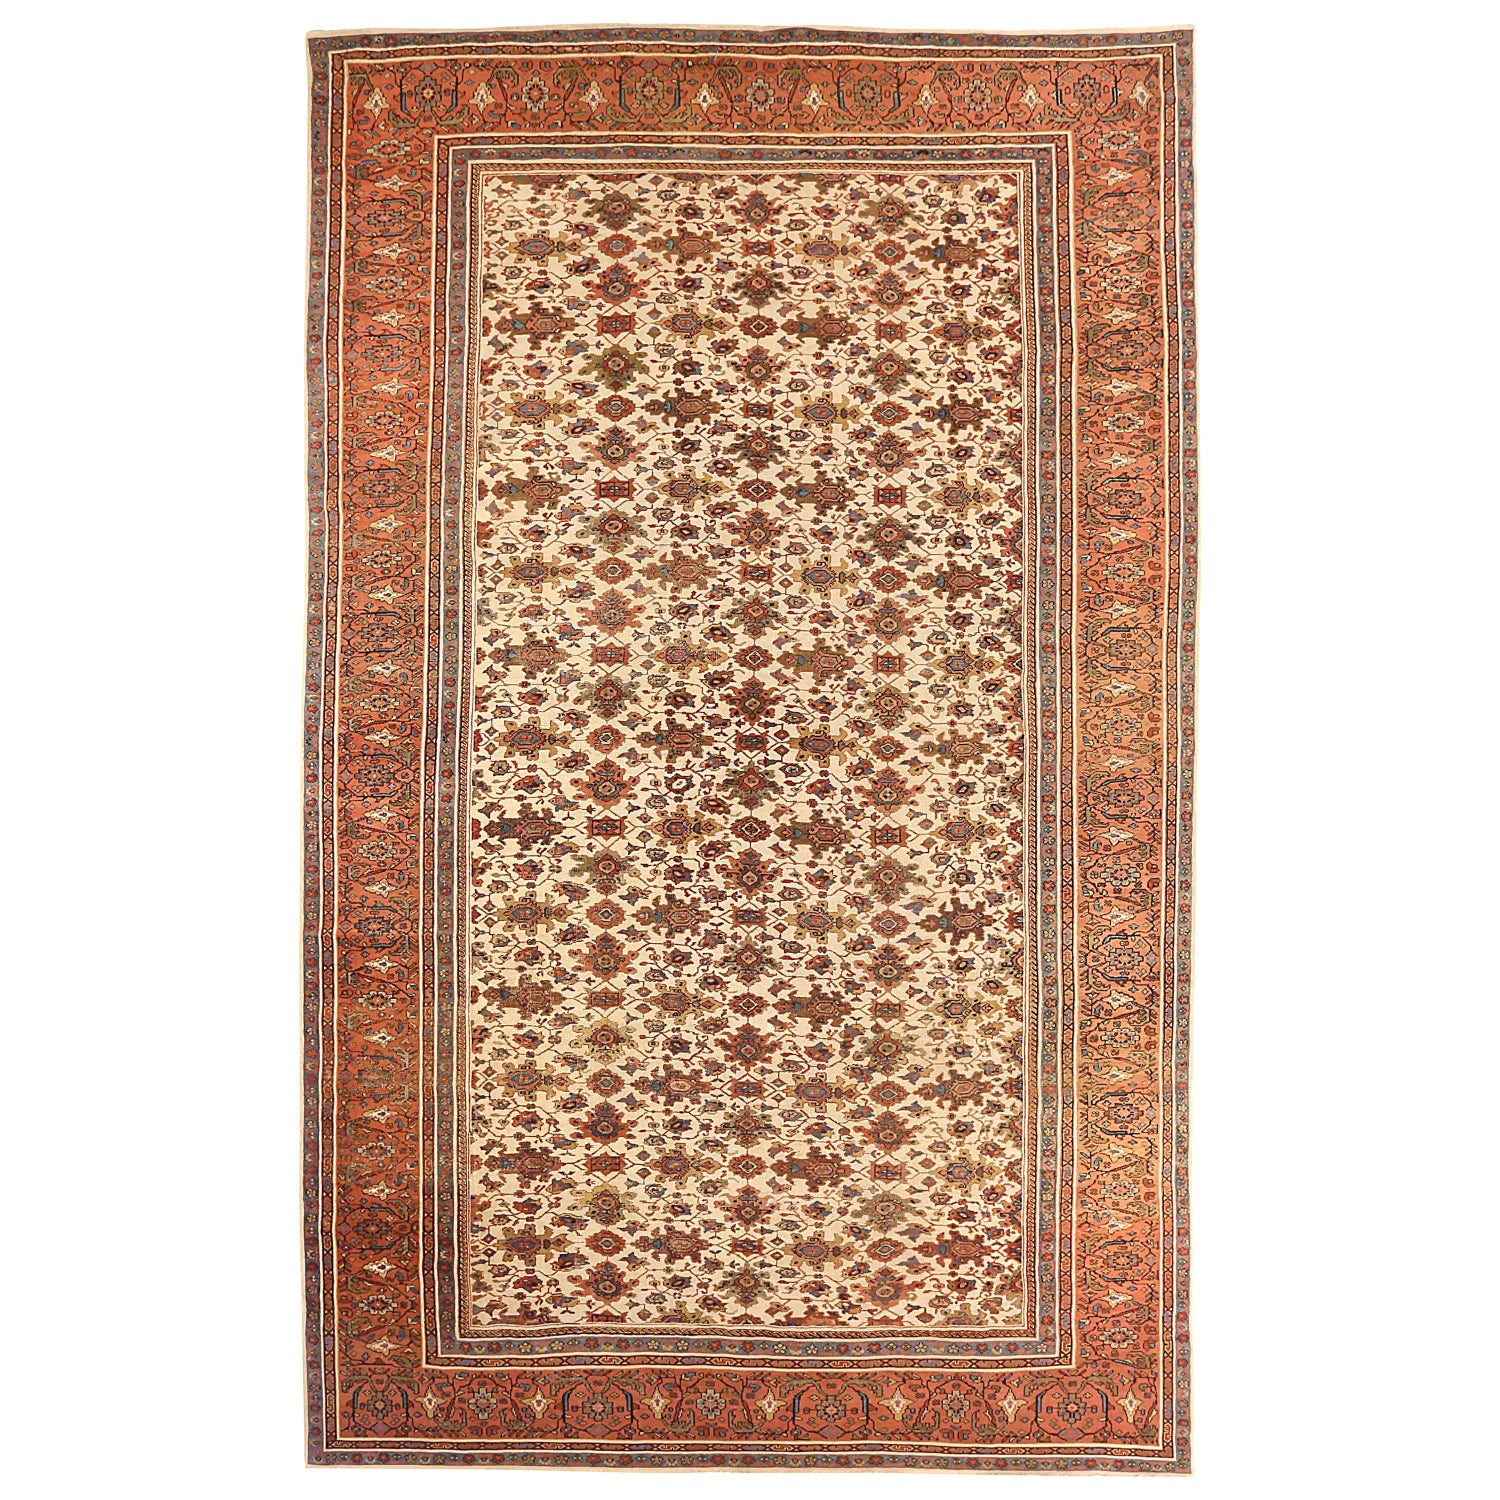 Antique Persian Area Rug Sultanabad, American Home Rug Company